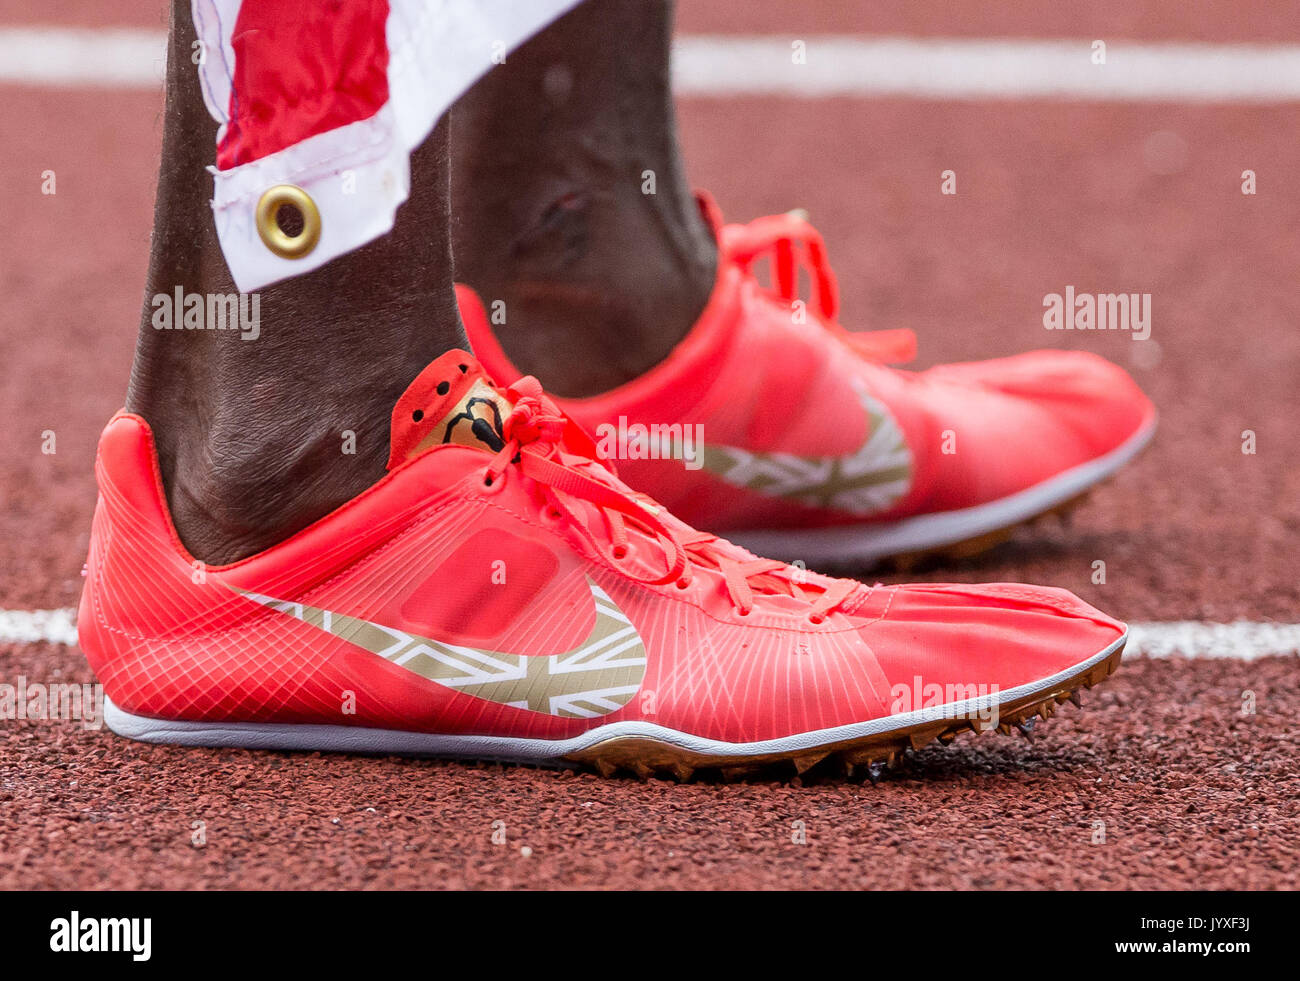 Nike Running Shoes High Resolution Stock Photography and Images - Alamy